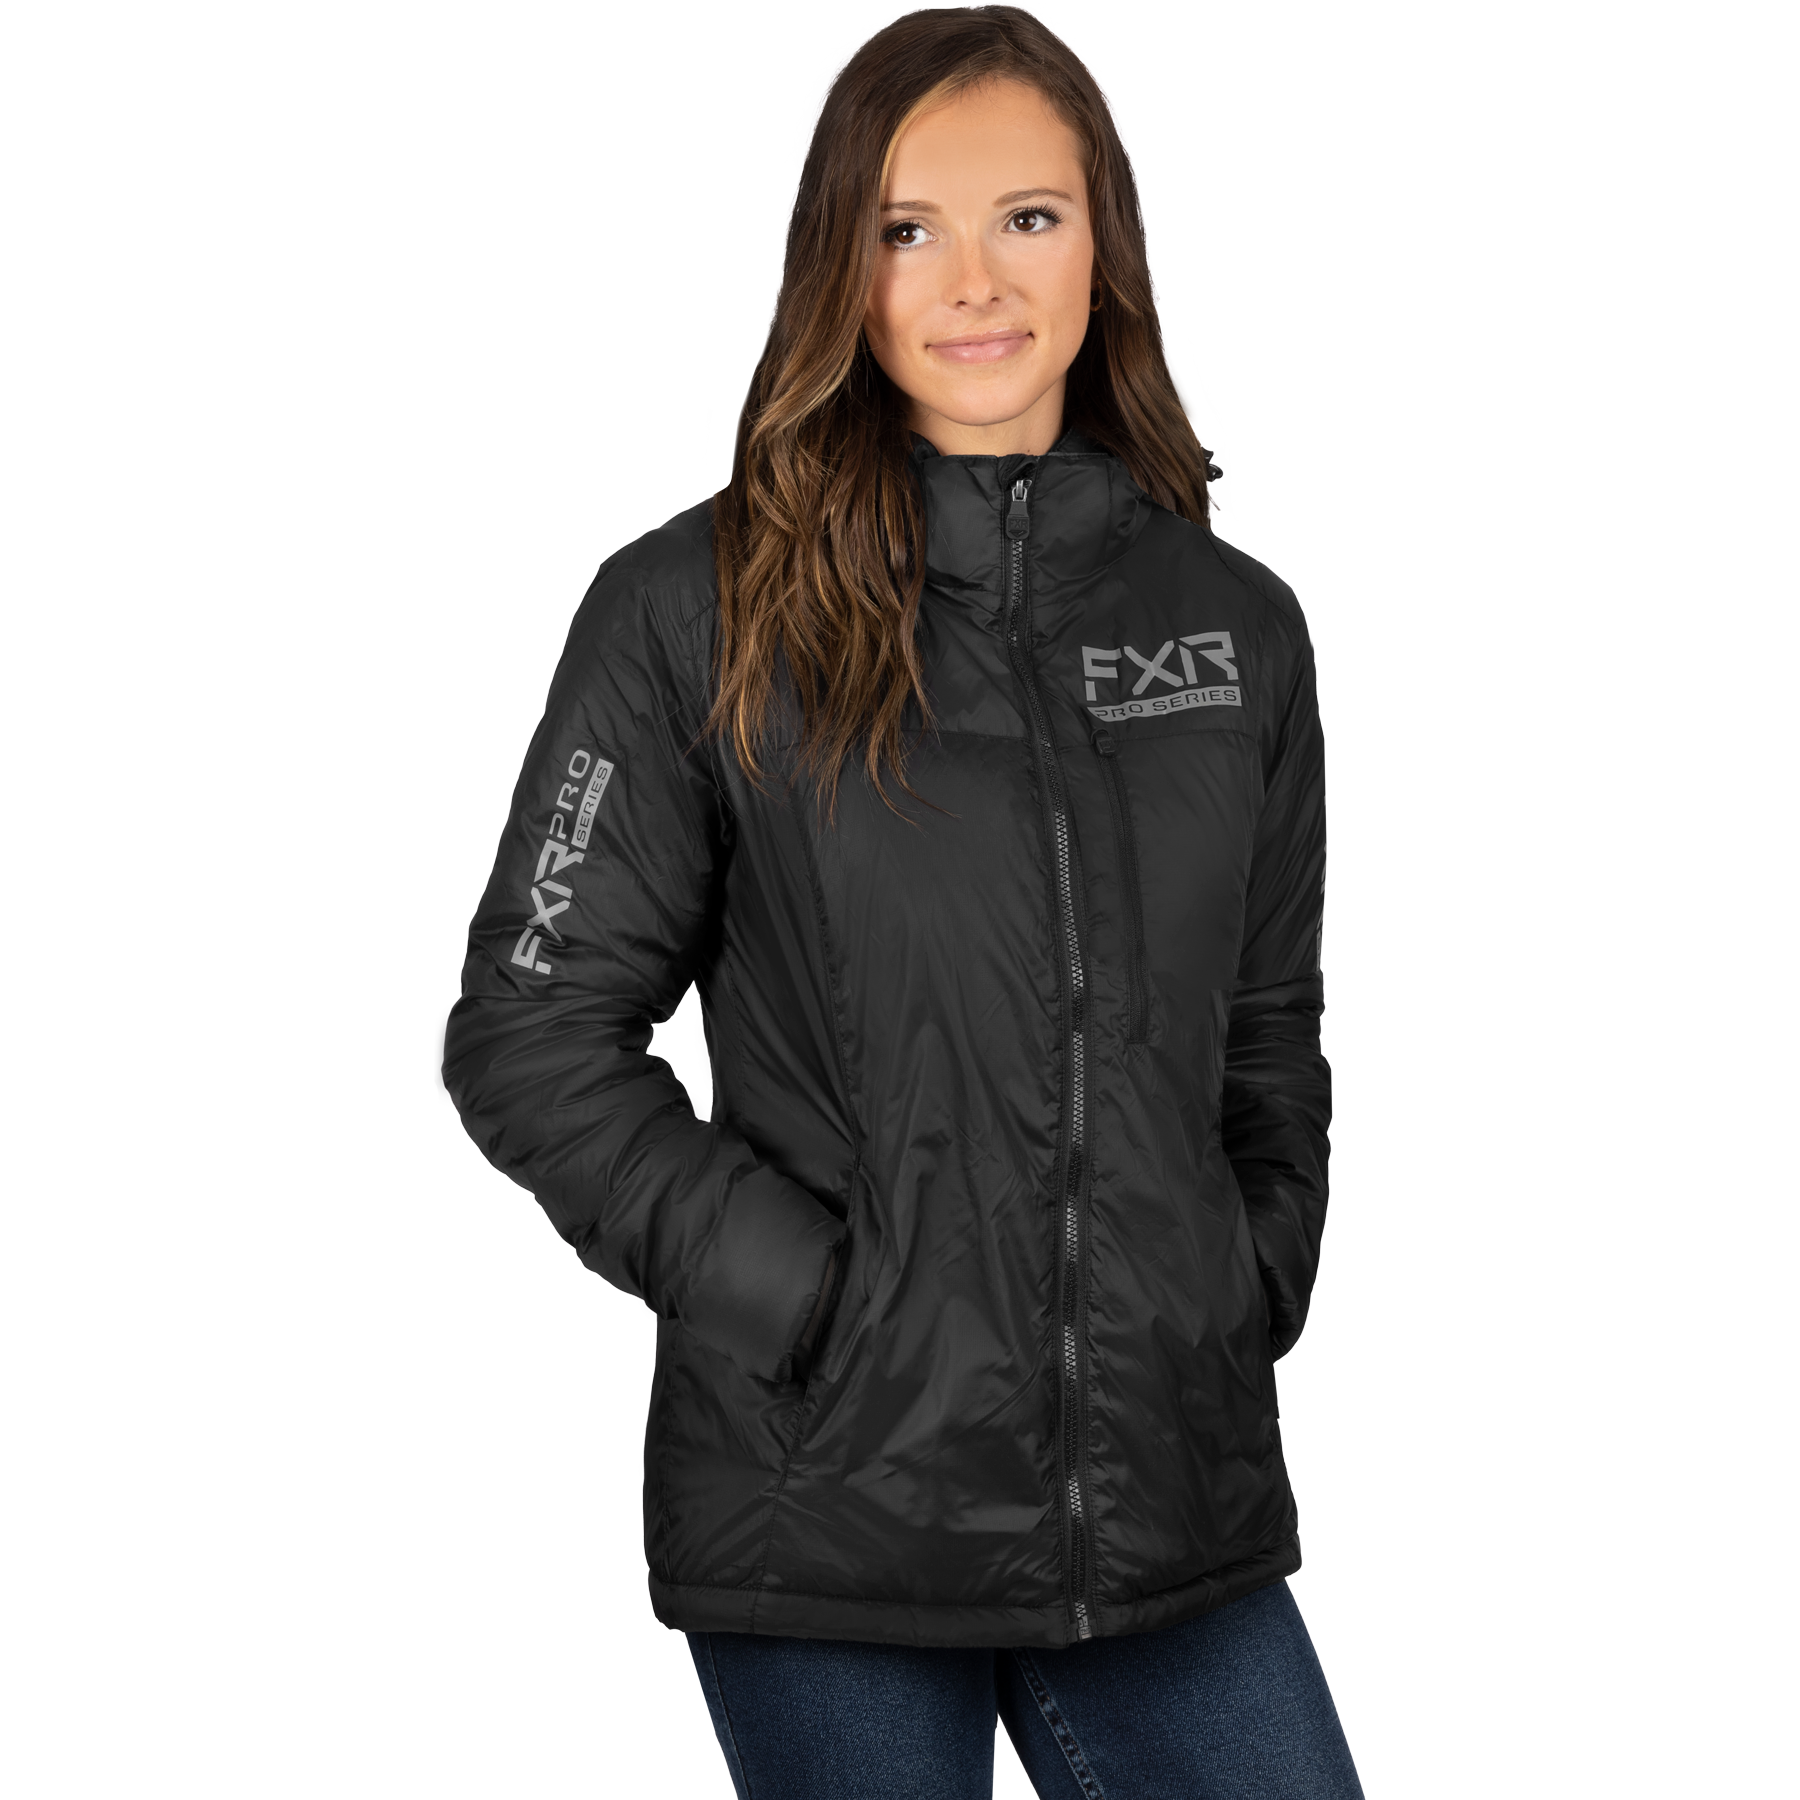 fxr racing jackets  expedition lite  jackets - casual